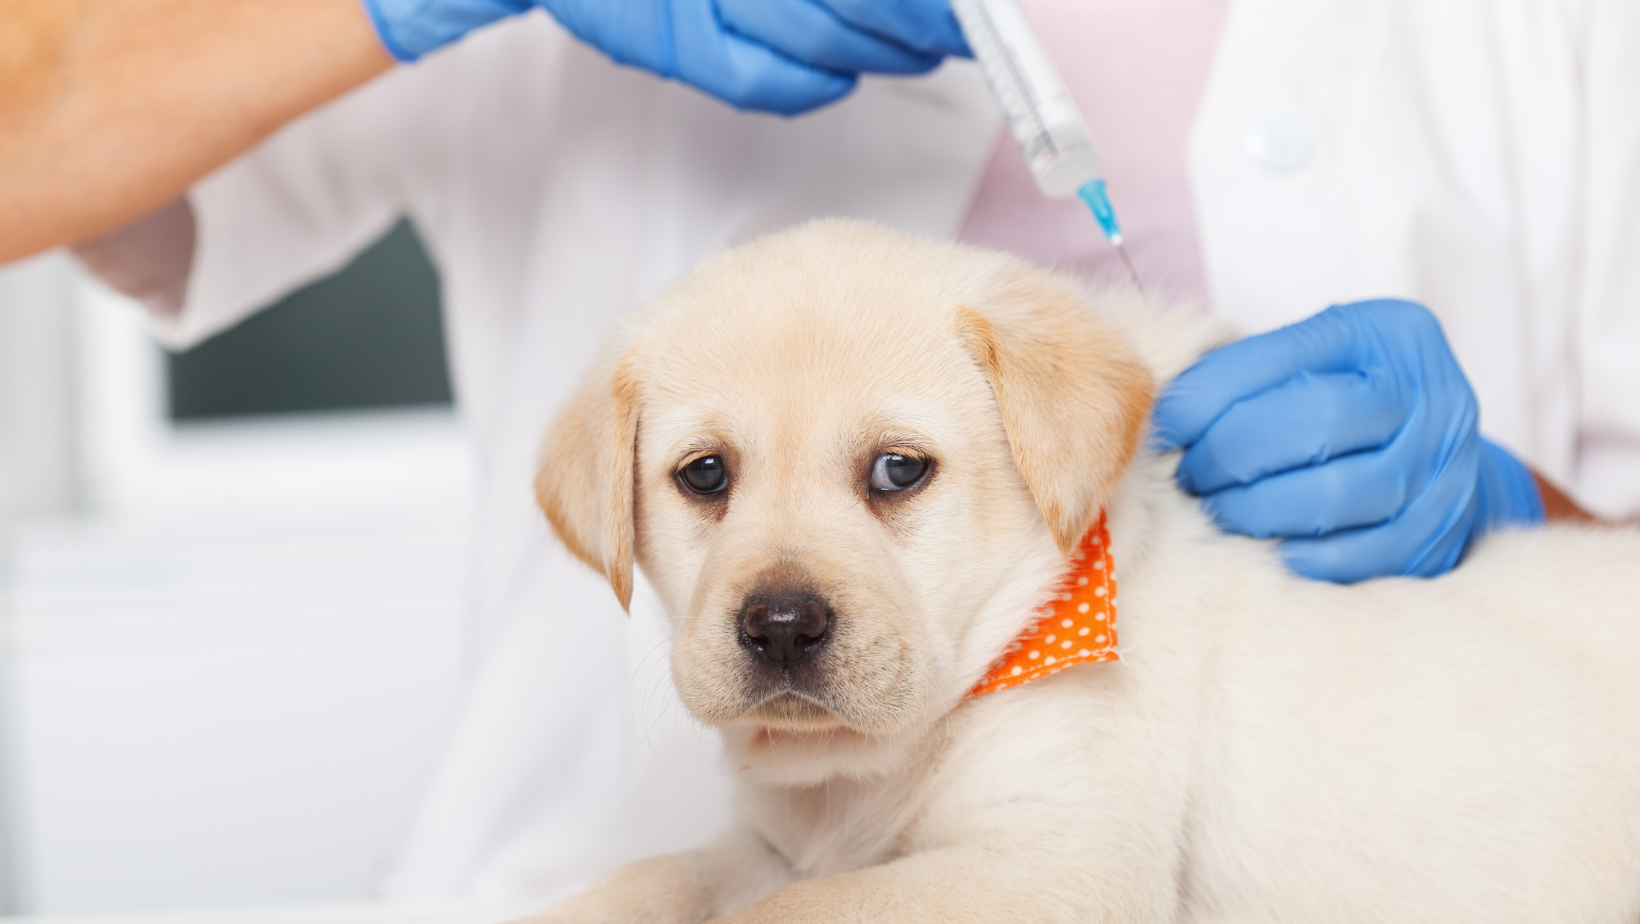 How Does the Vet Treat Vaccine Reaction?